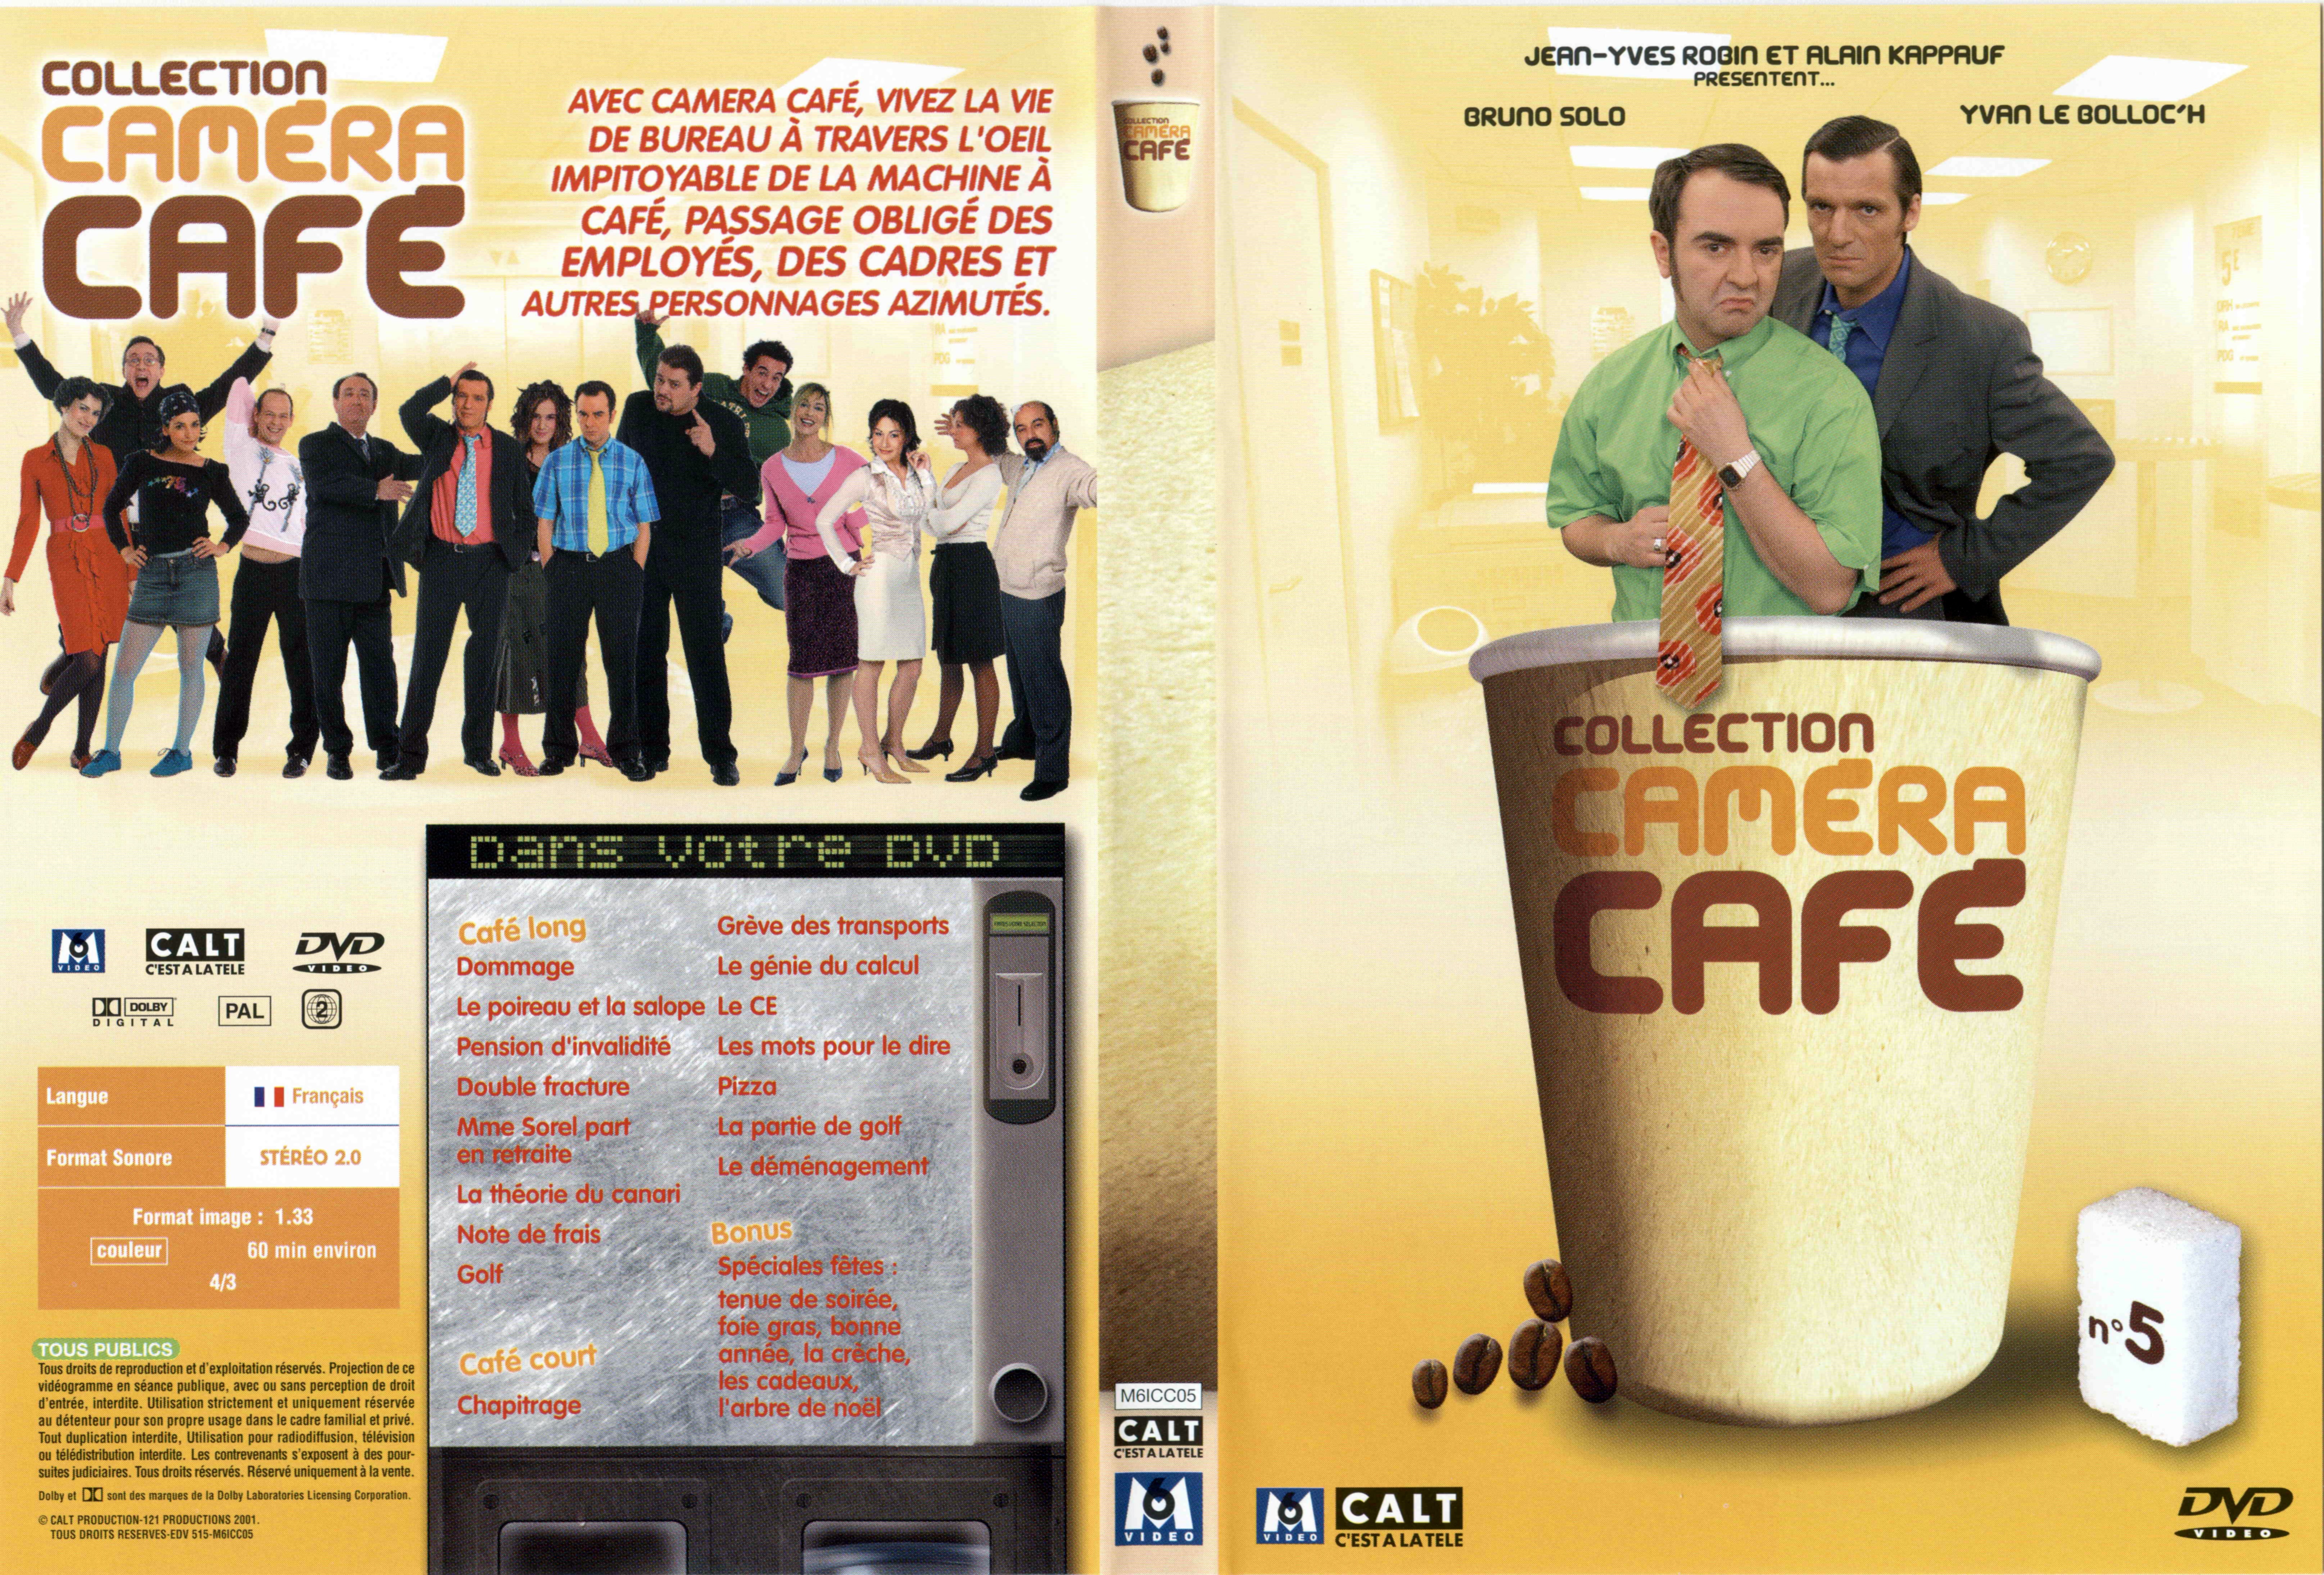 Jaquette DVD Collection Camera Cafe vol 05